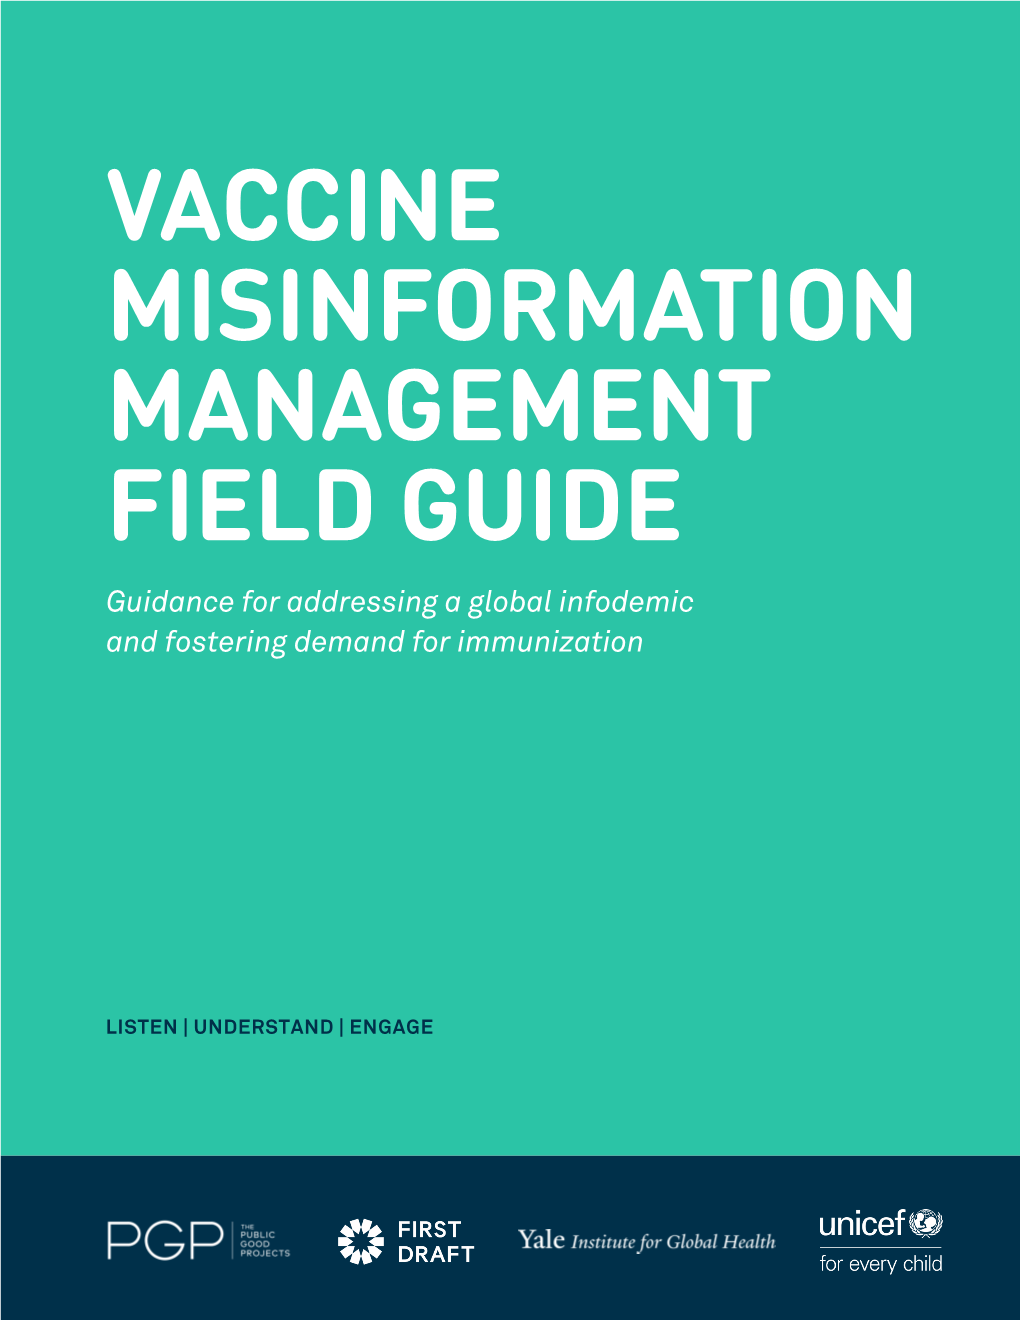 VACCINE MISINFORMATION MANAGEMENT FIELD GUIDE Guidance for Addressing a Global Infodemic and Fostering Demand for Immunization